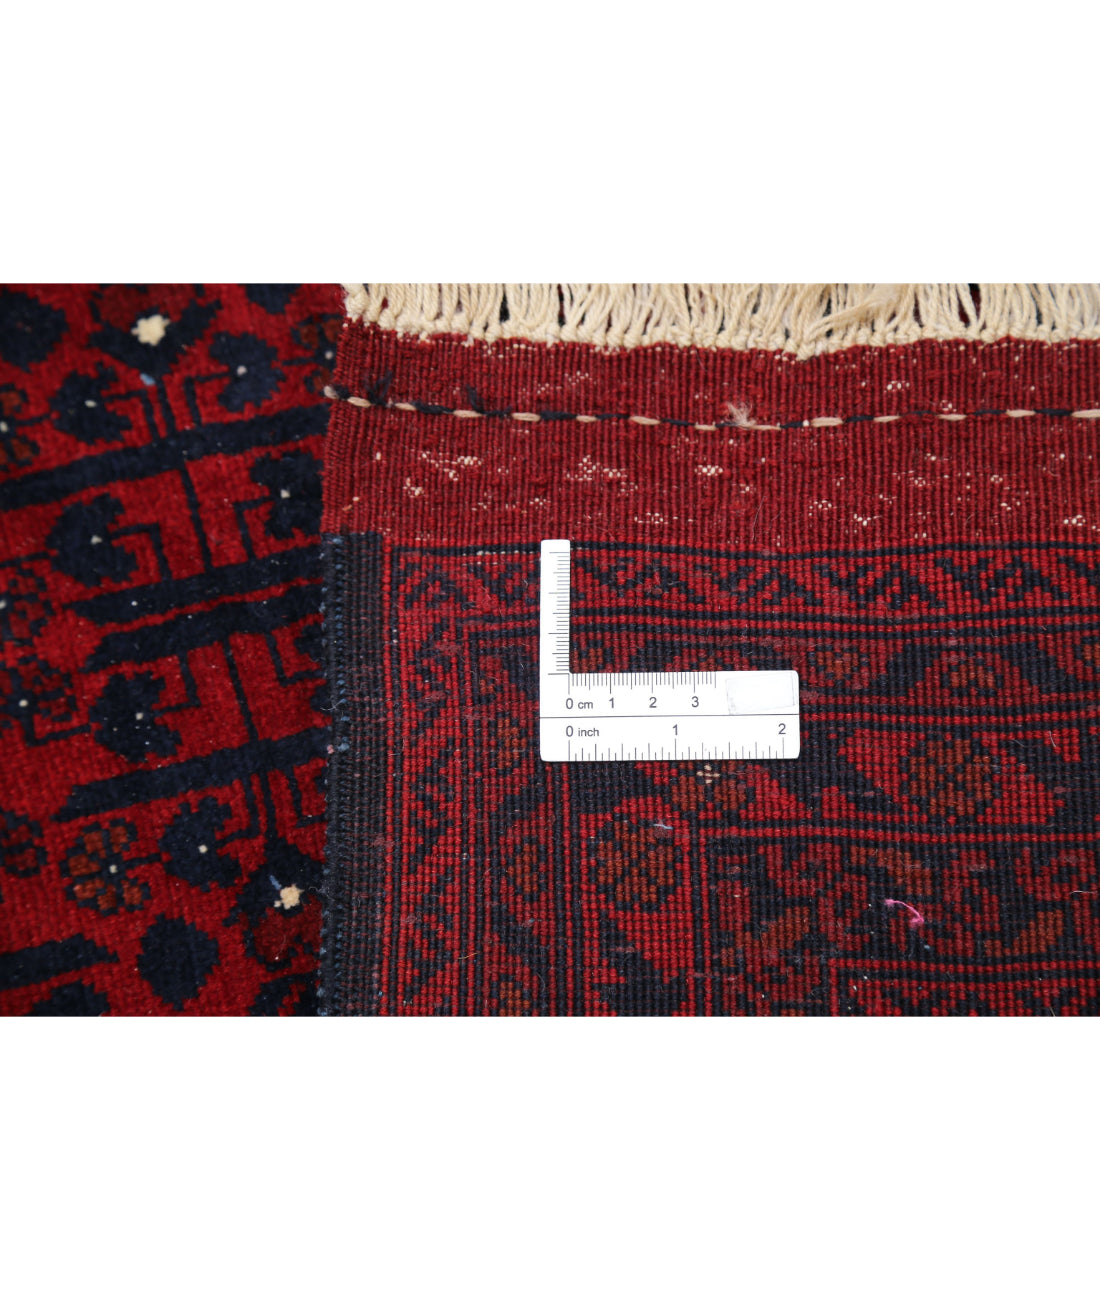 Hand Knotted Afghan Beljik Wool Rug - 8'2'' x 10'10'' 8'2'' x 10'10'' (245 X 325) / Red / Red